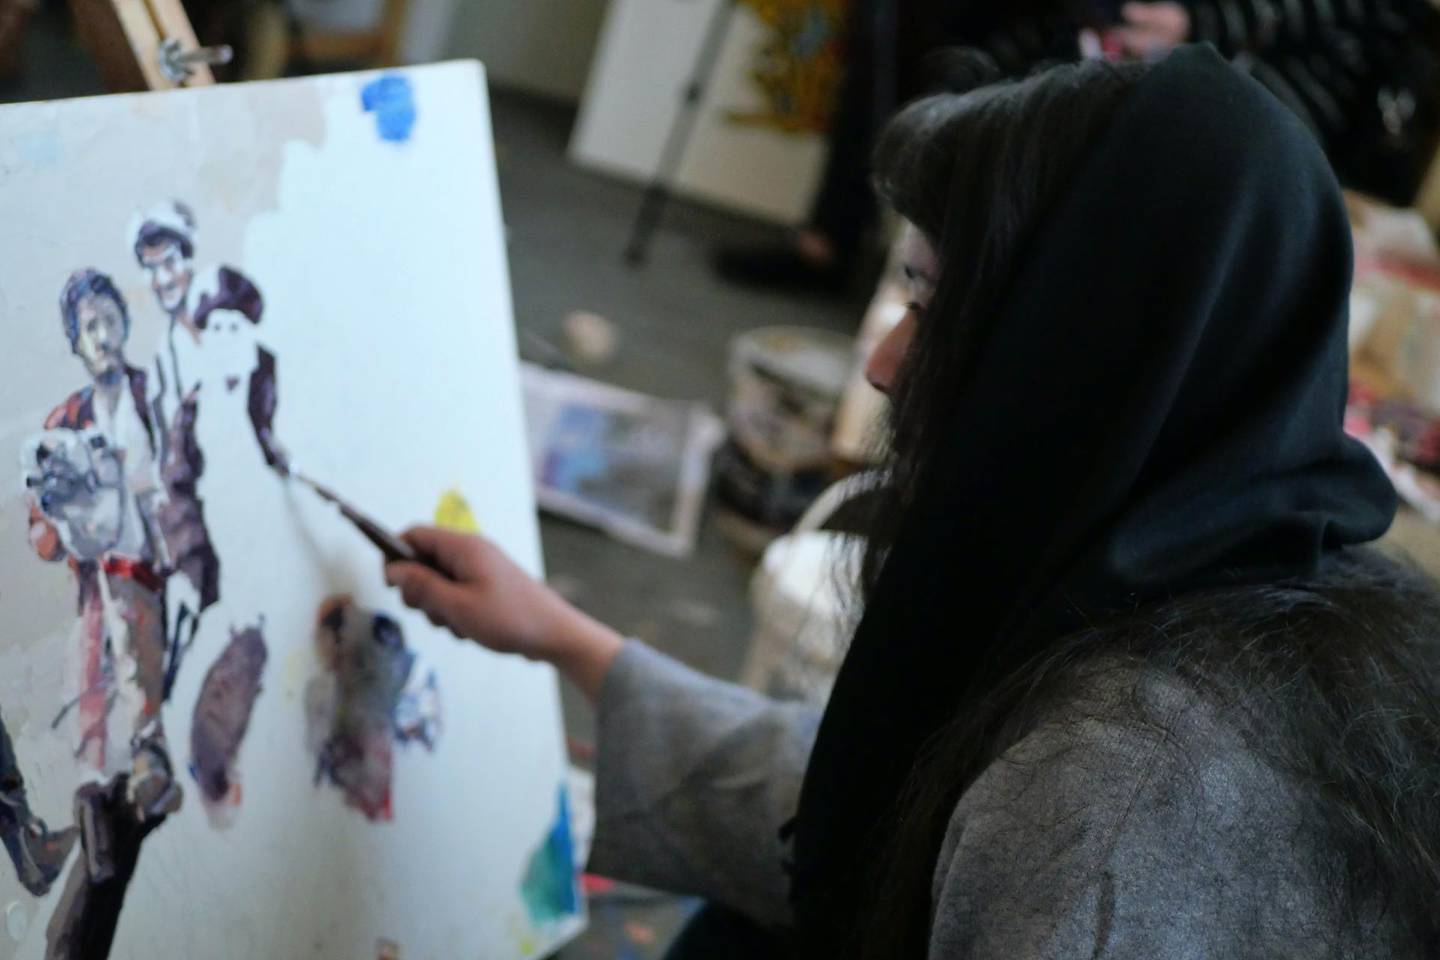 Pictured: A woman artist paints at ArtLords headquarters in Kabul. Photo by Charlie FaulknerFebruary 2021